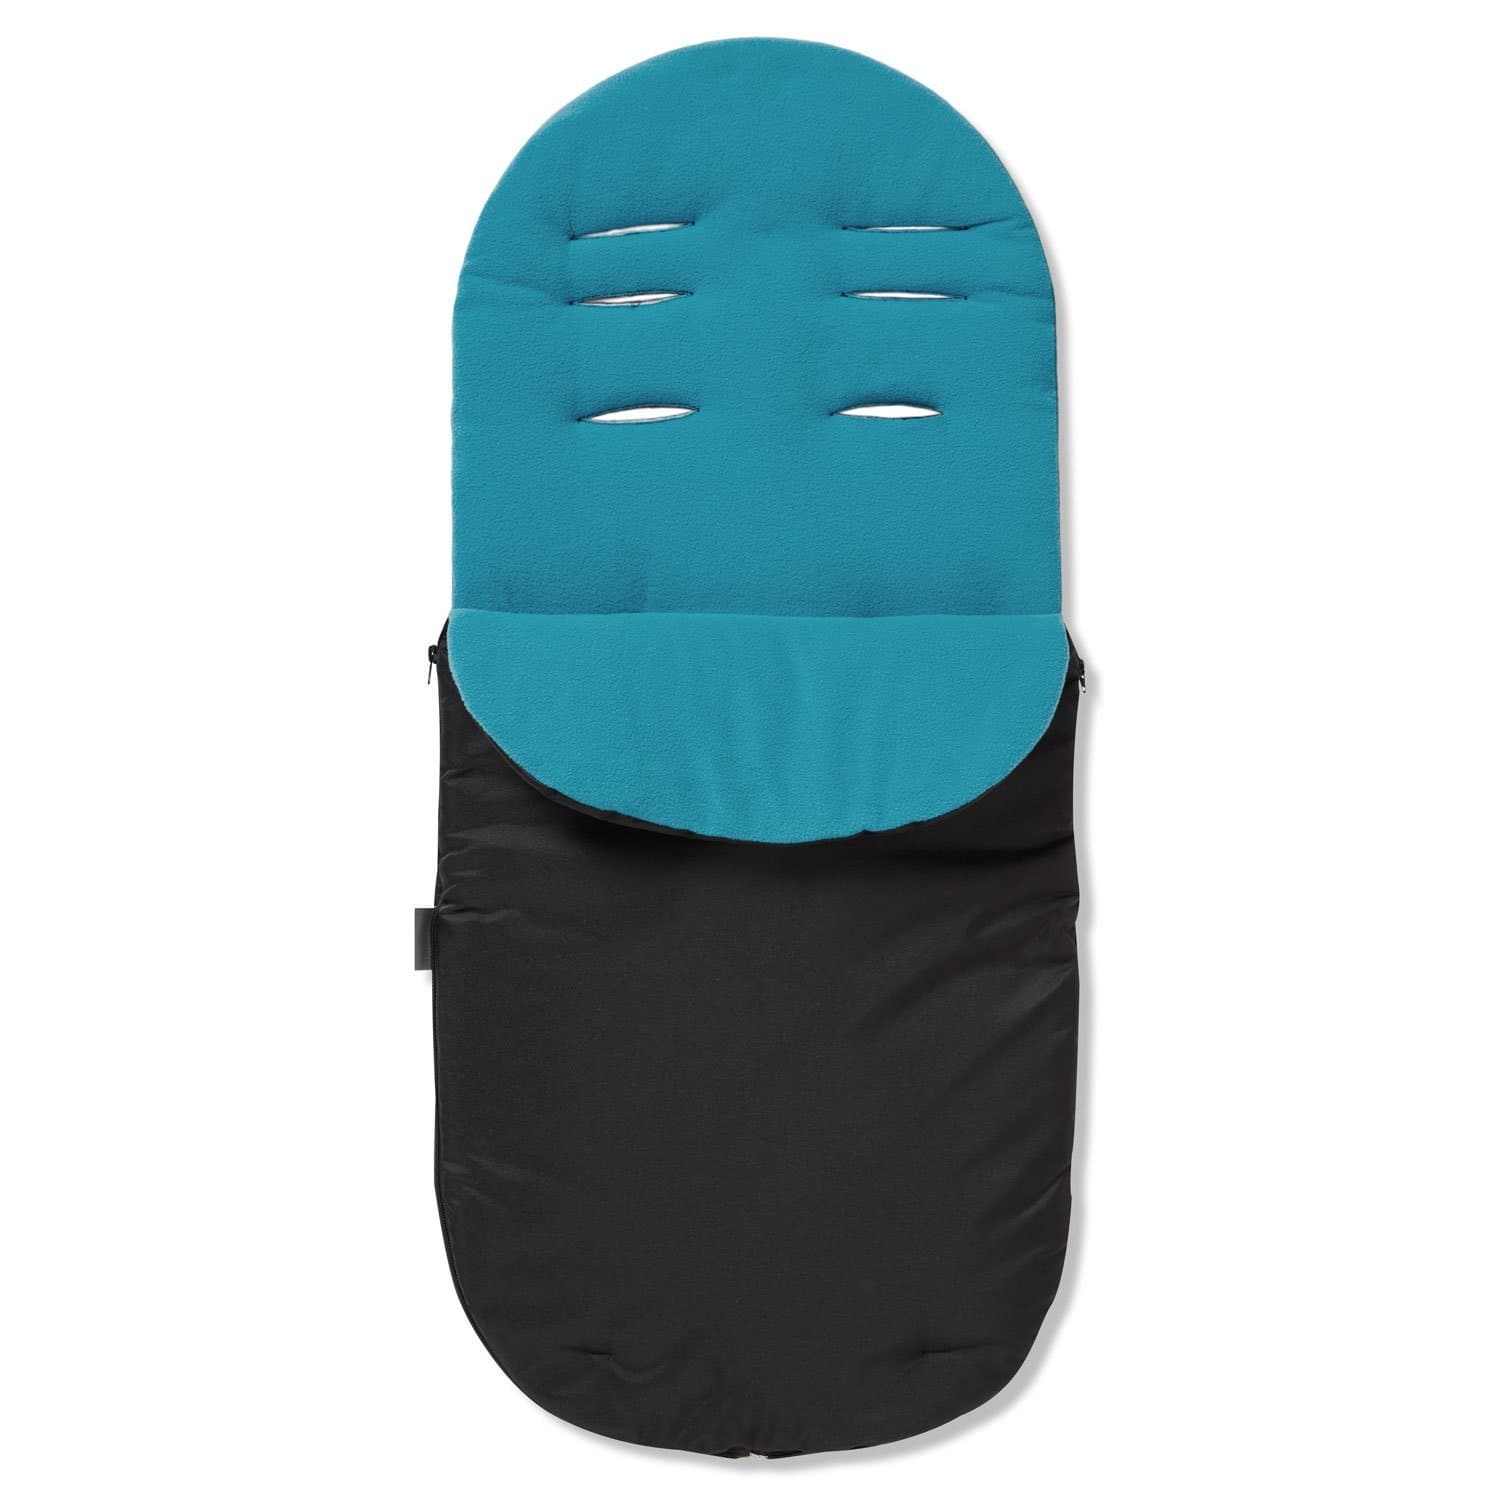 Footmuff / Cosy Toes Compatible with Babyzen - Turquoise / Fits All Models | For Your Little One